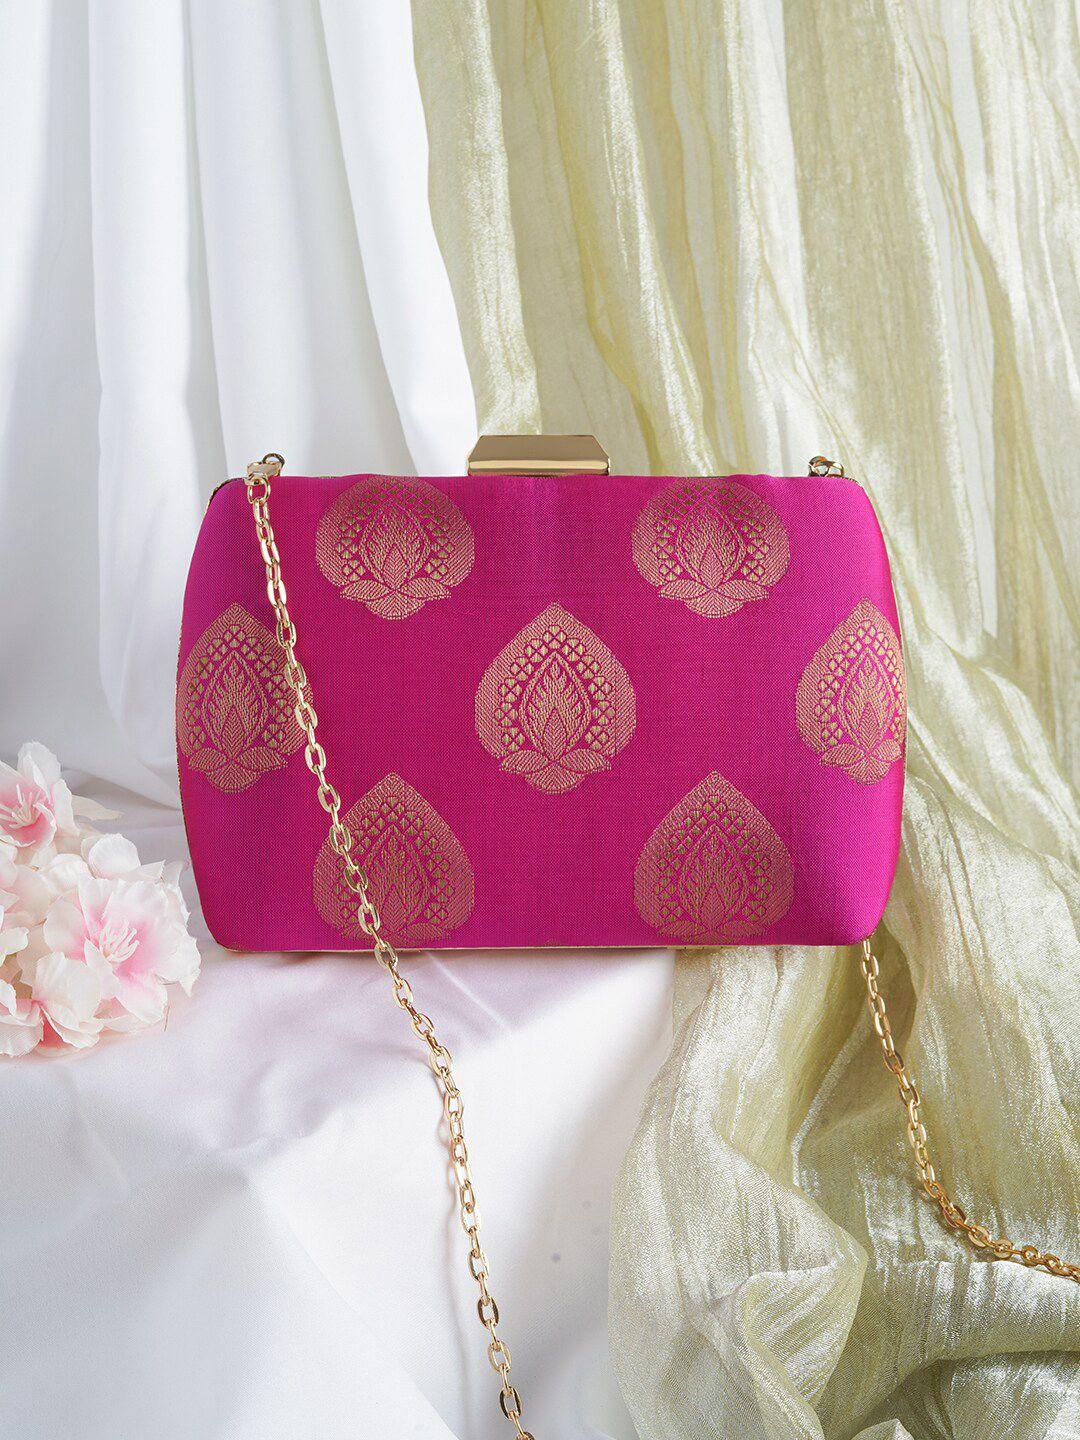 teejh embroidered box clutch with shoulder strap